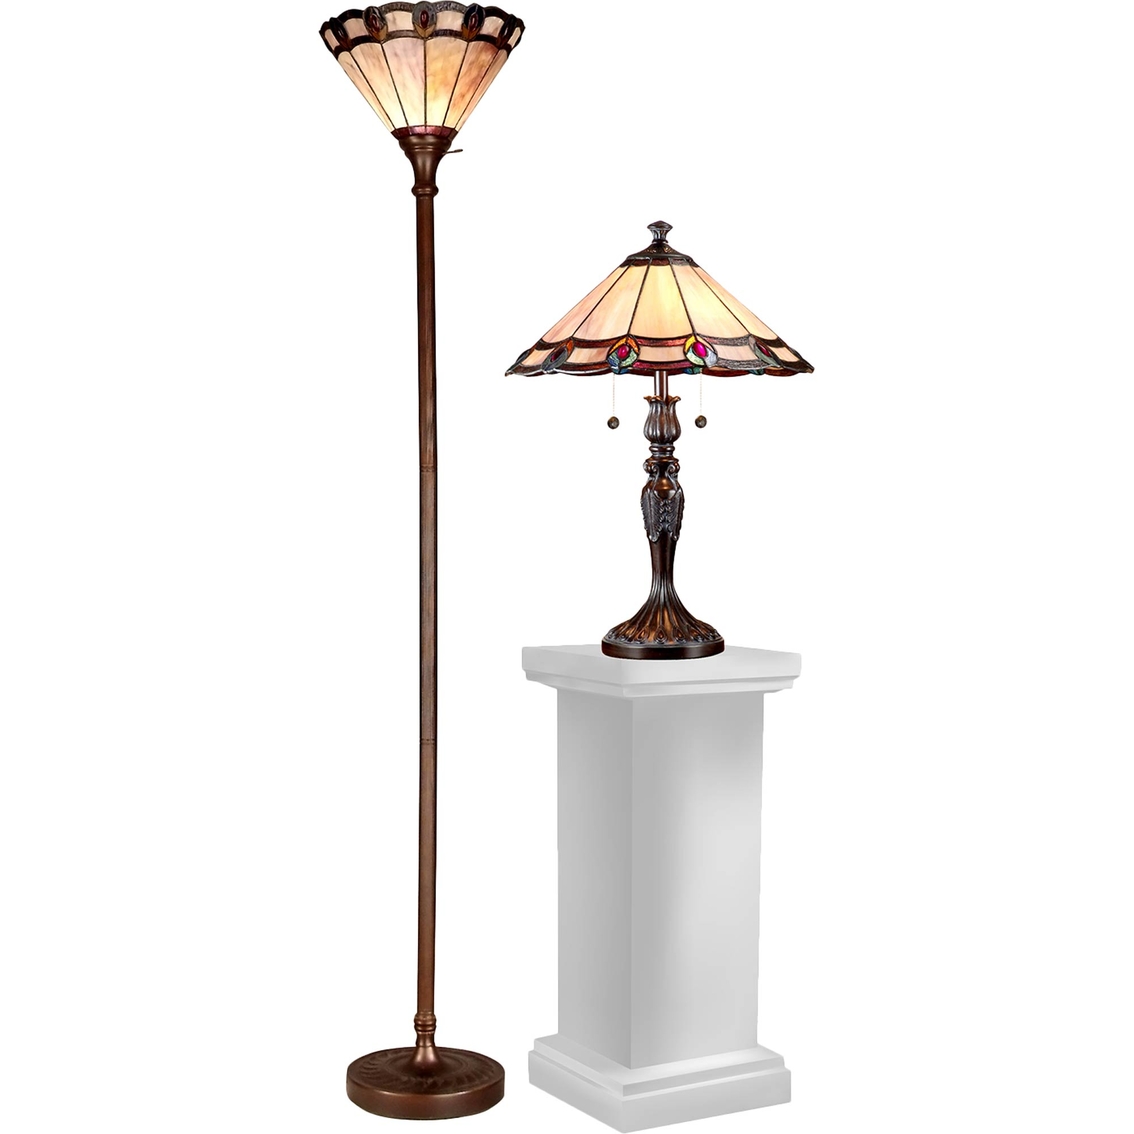 Dale Tiffany Peacock 2 Pc Torchiere Floor Lamp And Table Lamp Set